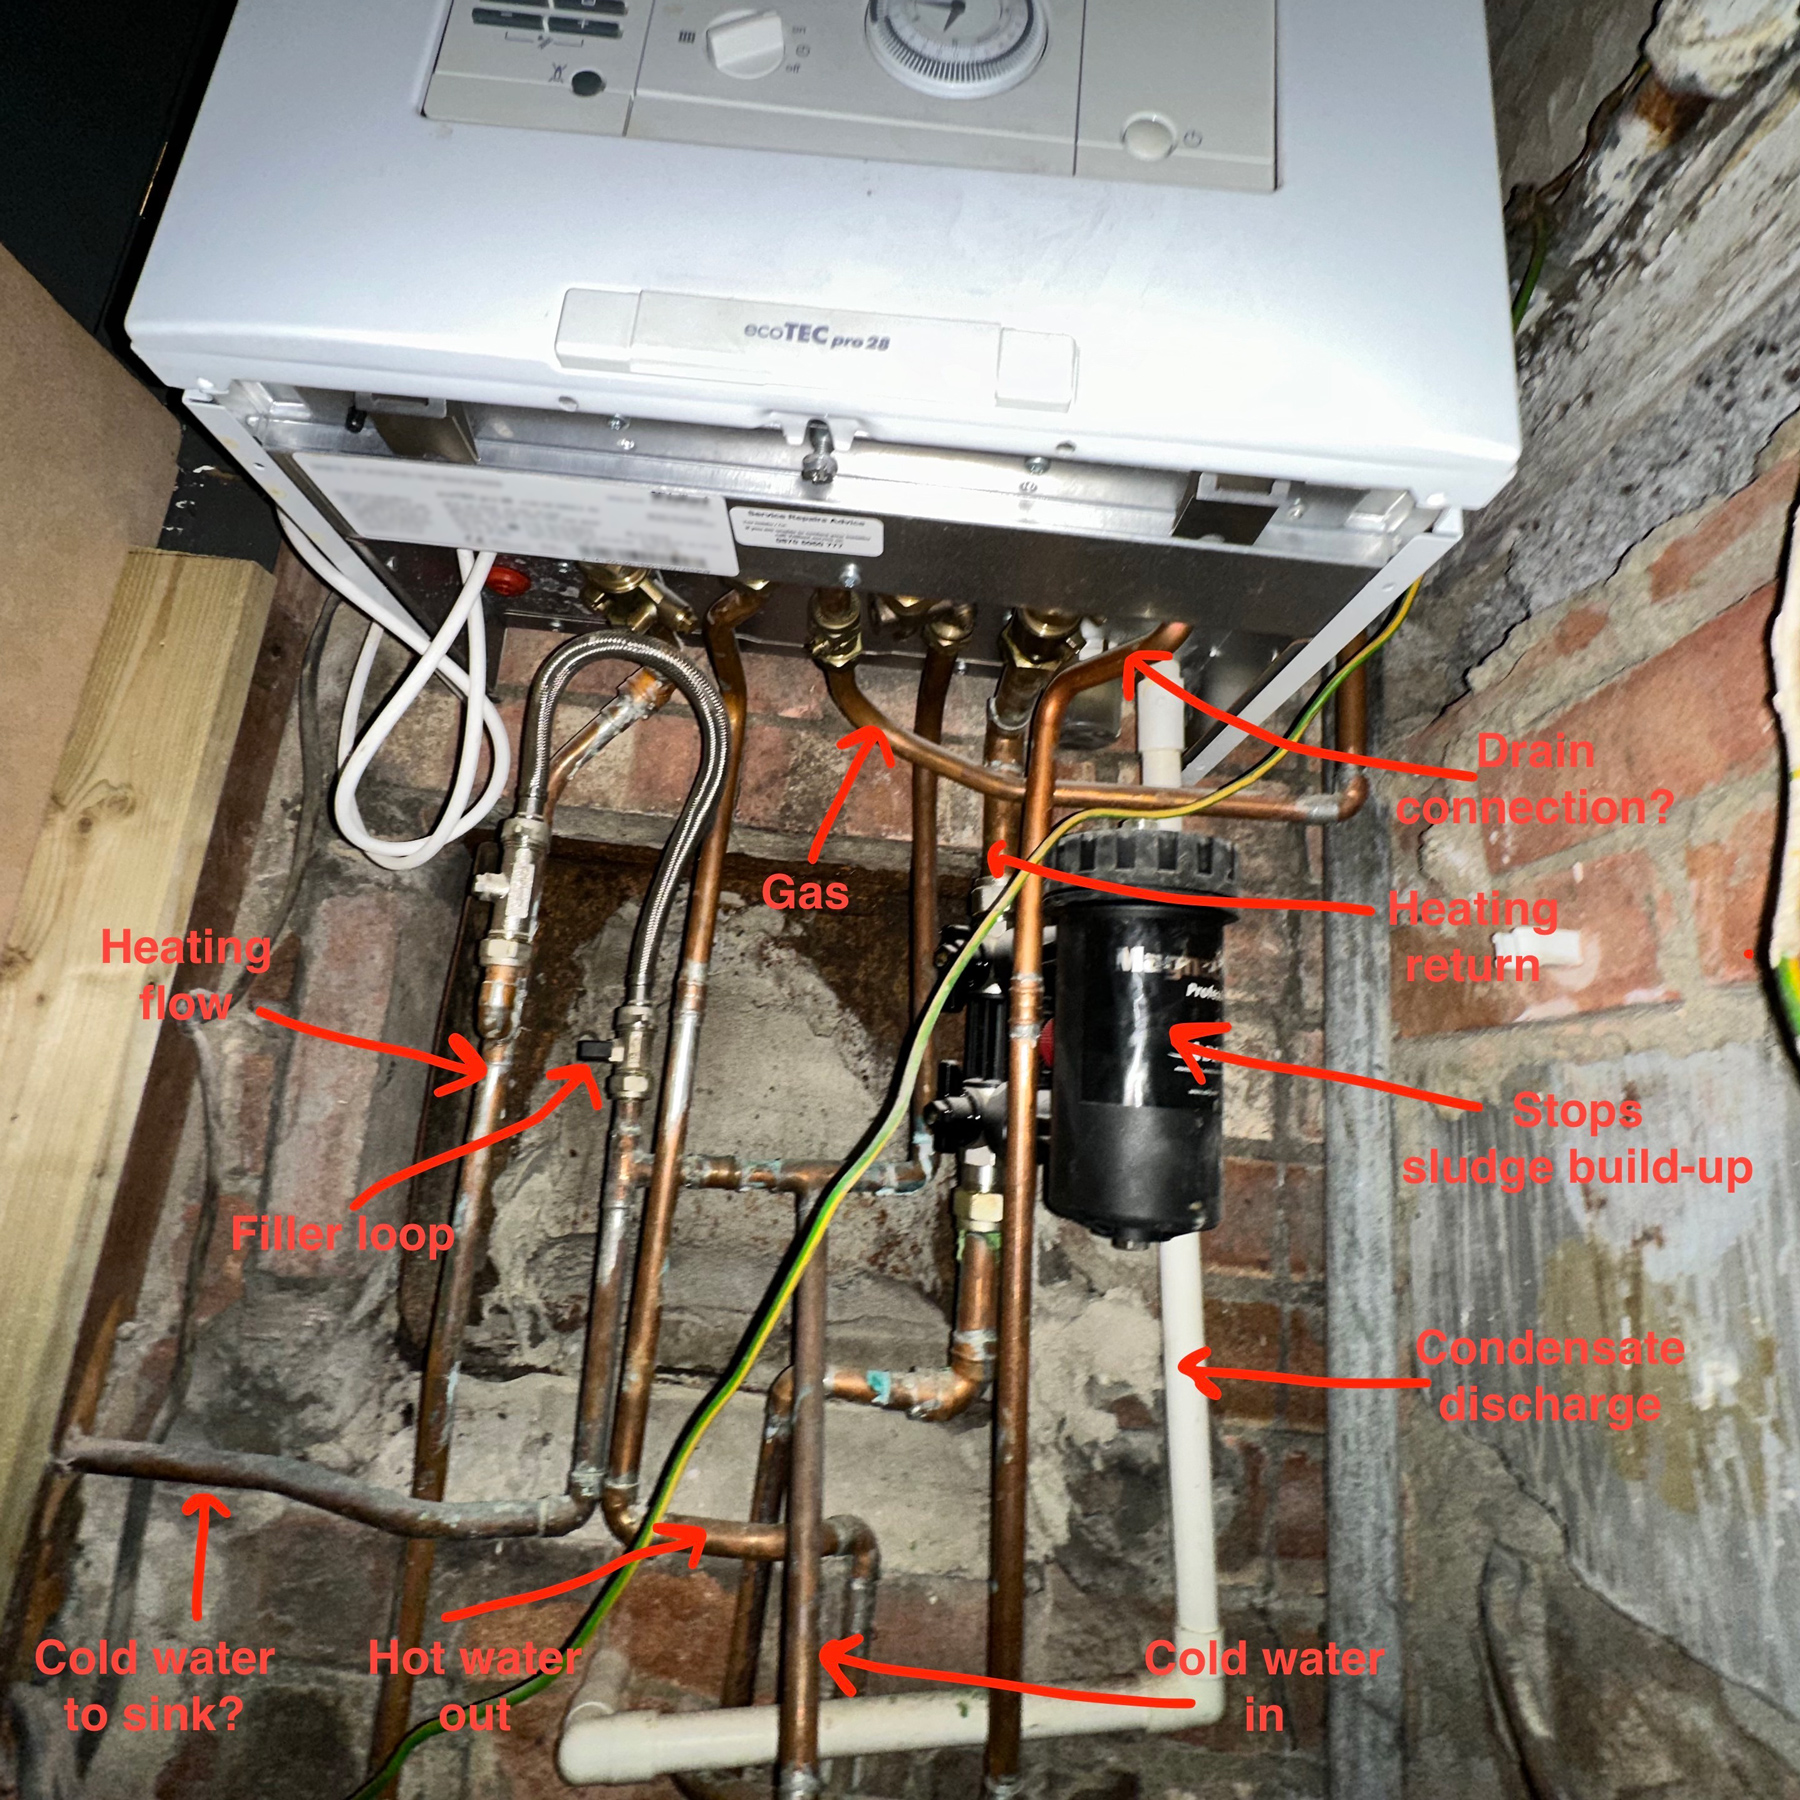 A boiler from below with various labeled pipes connected, some of the labels have question marks to indicate that I'm not 100% certain what the pipe is for